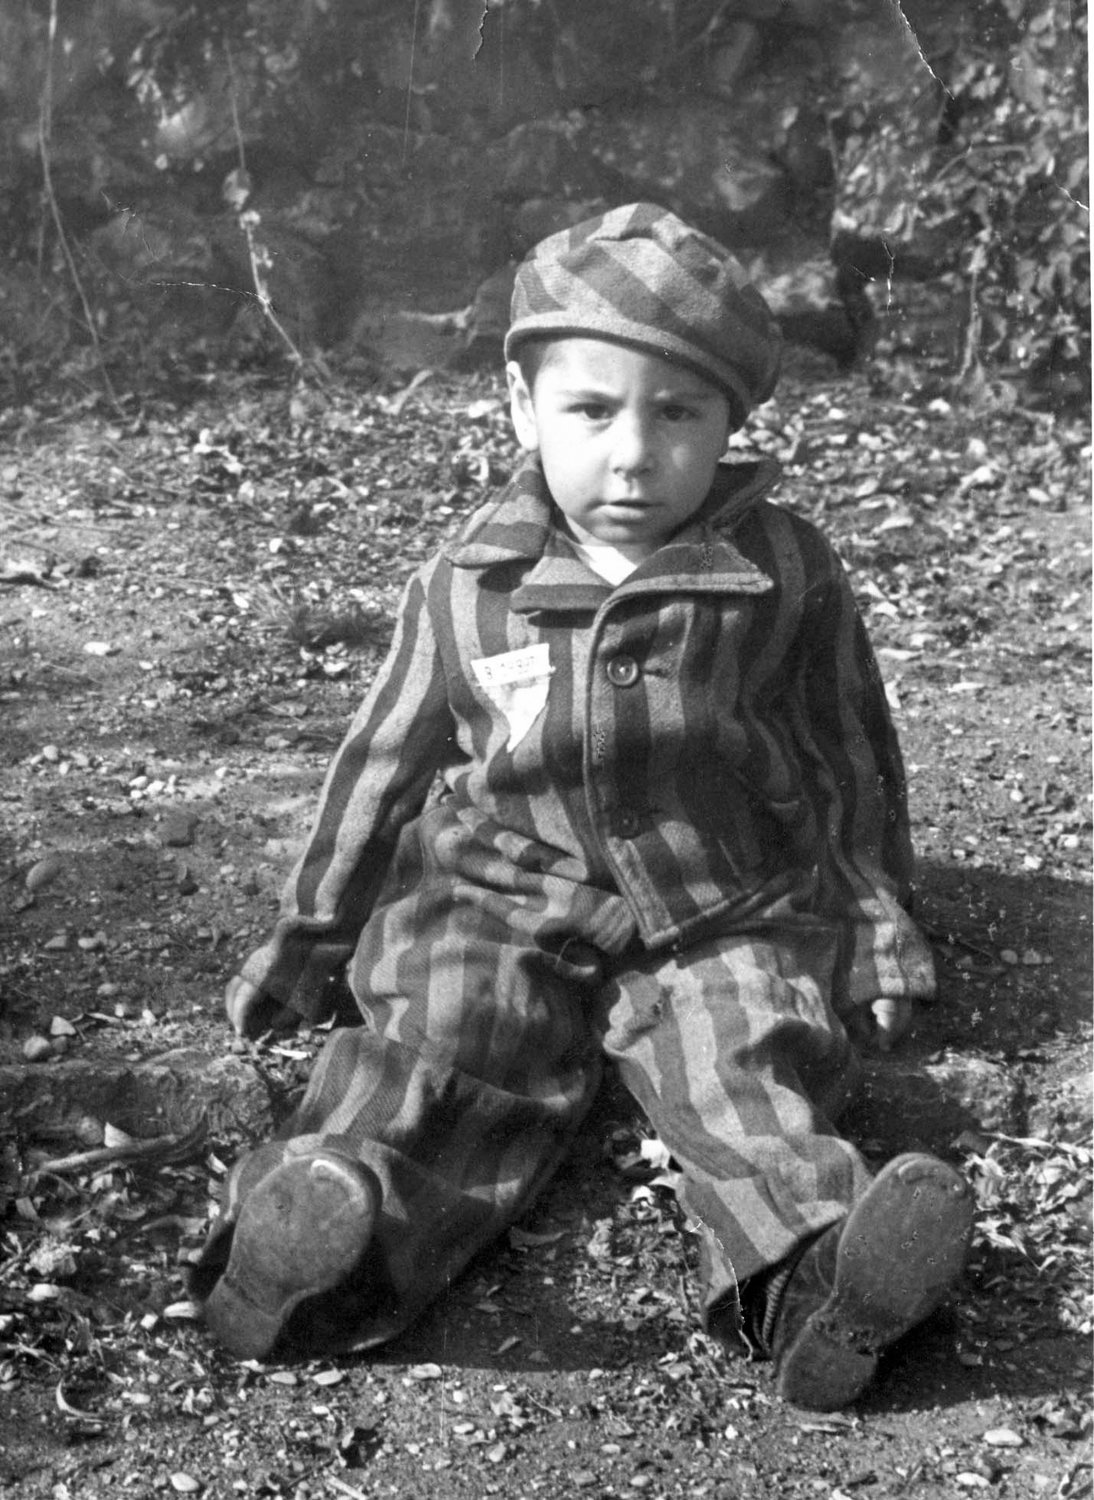 A boy wears a prisoner’s uniform after the liberation of the Nazi death camp Auschwitz-Birkenau in 1945 in Oswiecim, Poland. Historians estimate that the Nazis sent at least 1.3 million people to Auschwitz between 1940-45, and it is believed that some 1.1 million of those perished there. Auschwitz was liberated by the Russian Army Jan. 27, 1945.